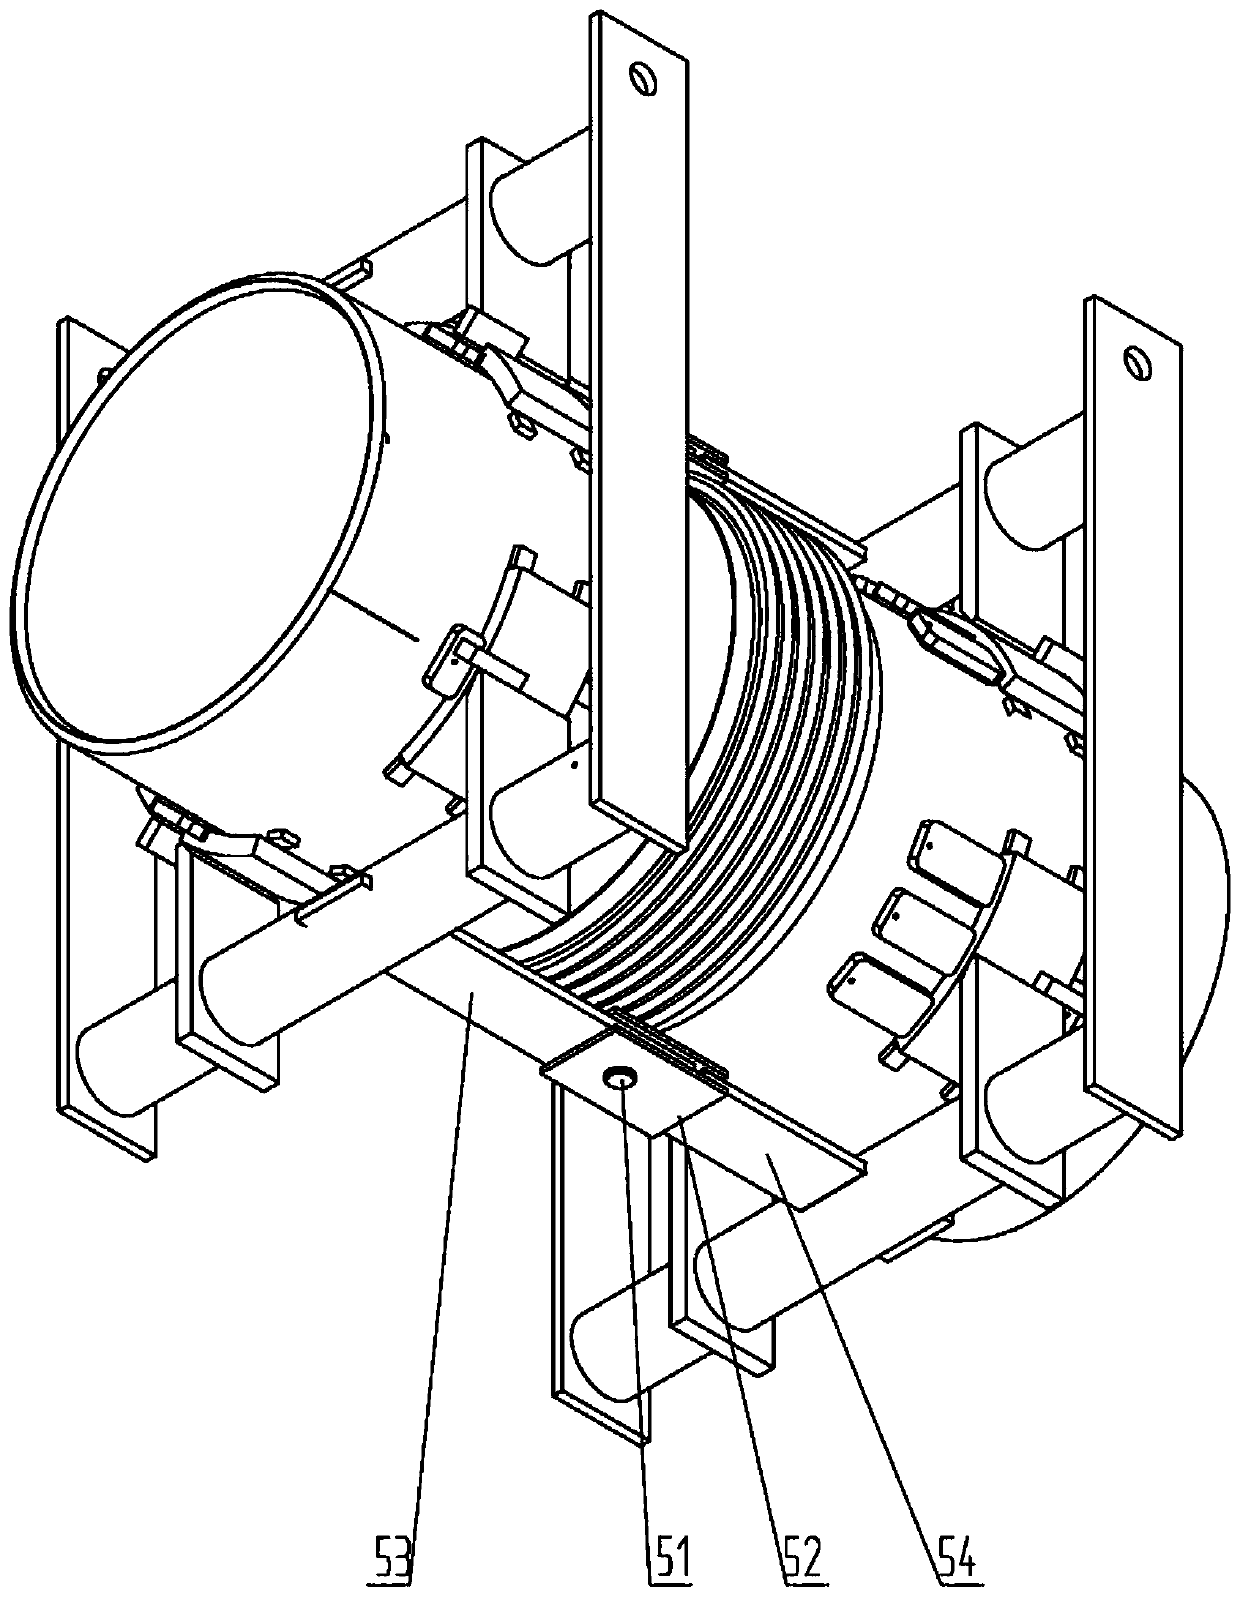 New-type hinge expansion joint for high-temperature flue of flue gas turbine